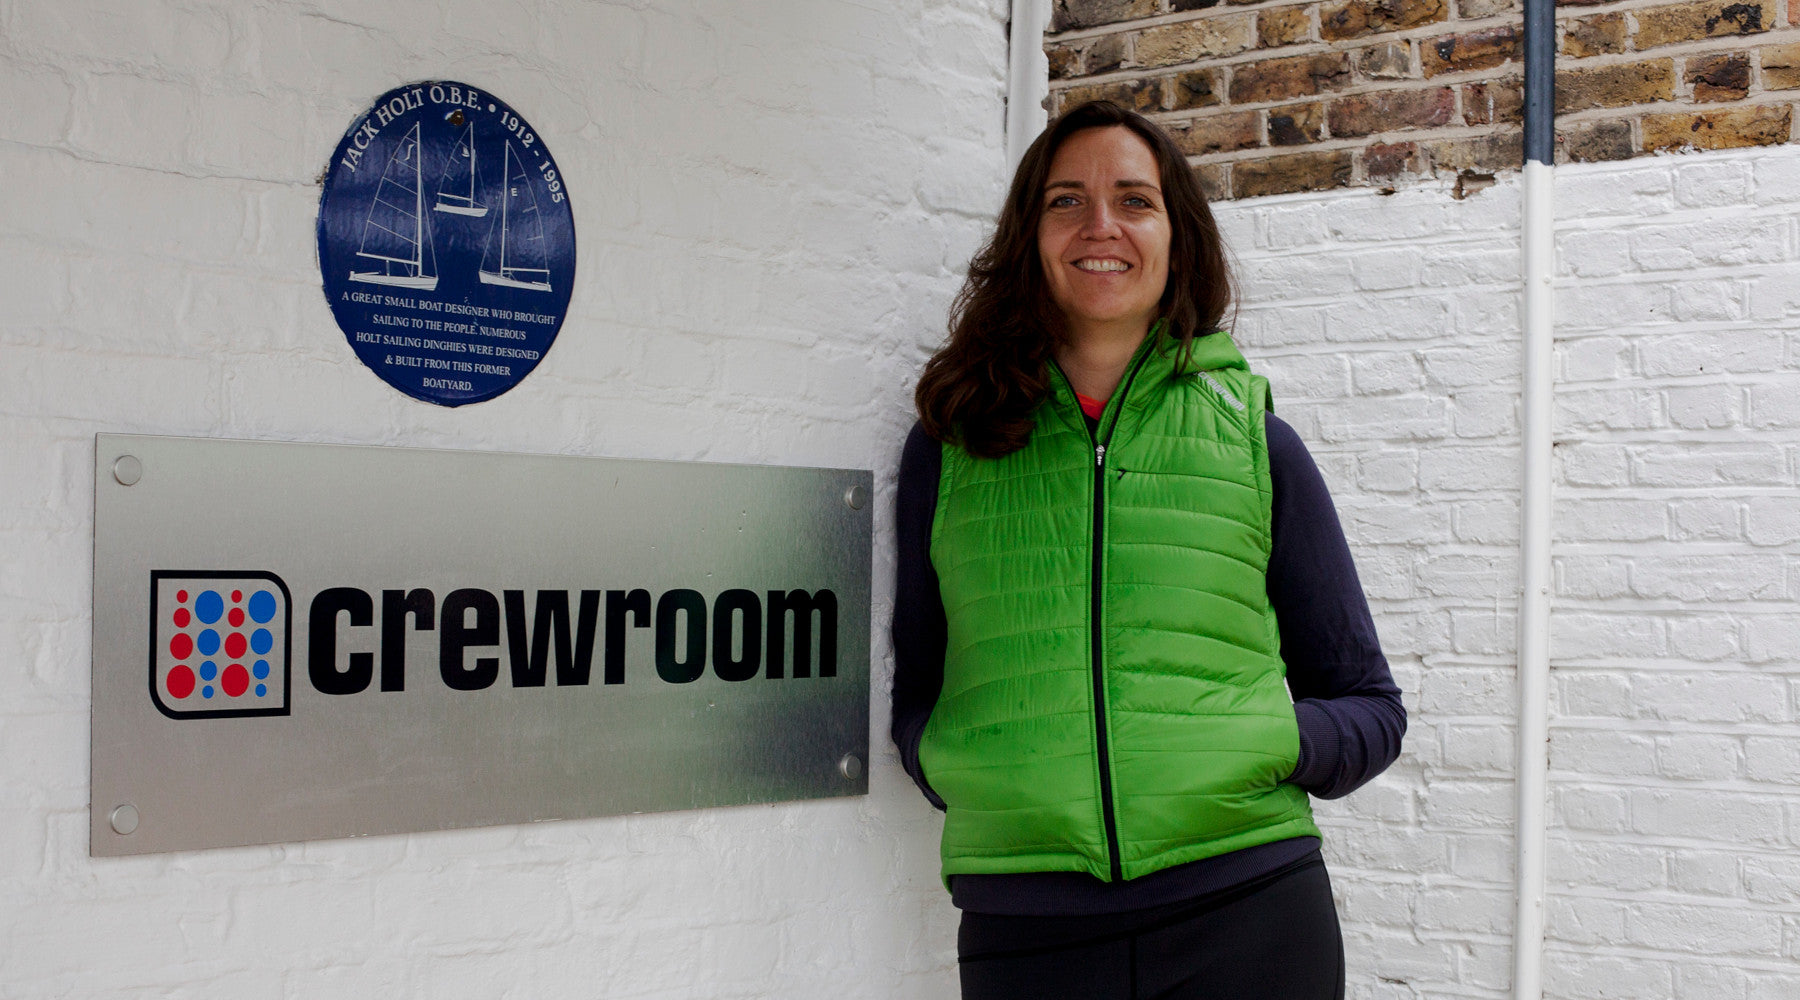 Q&A with Crewroom founder, Kate Giles